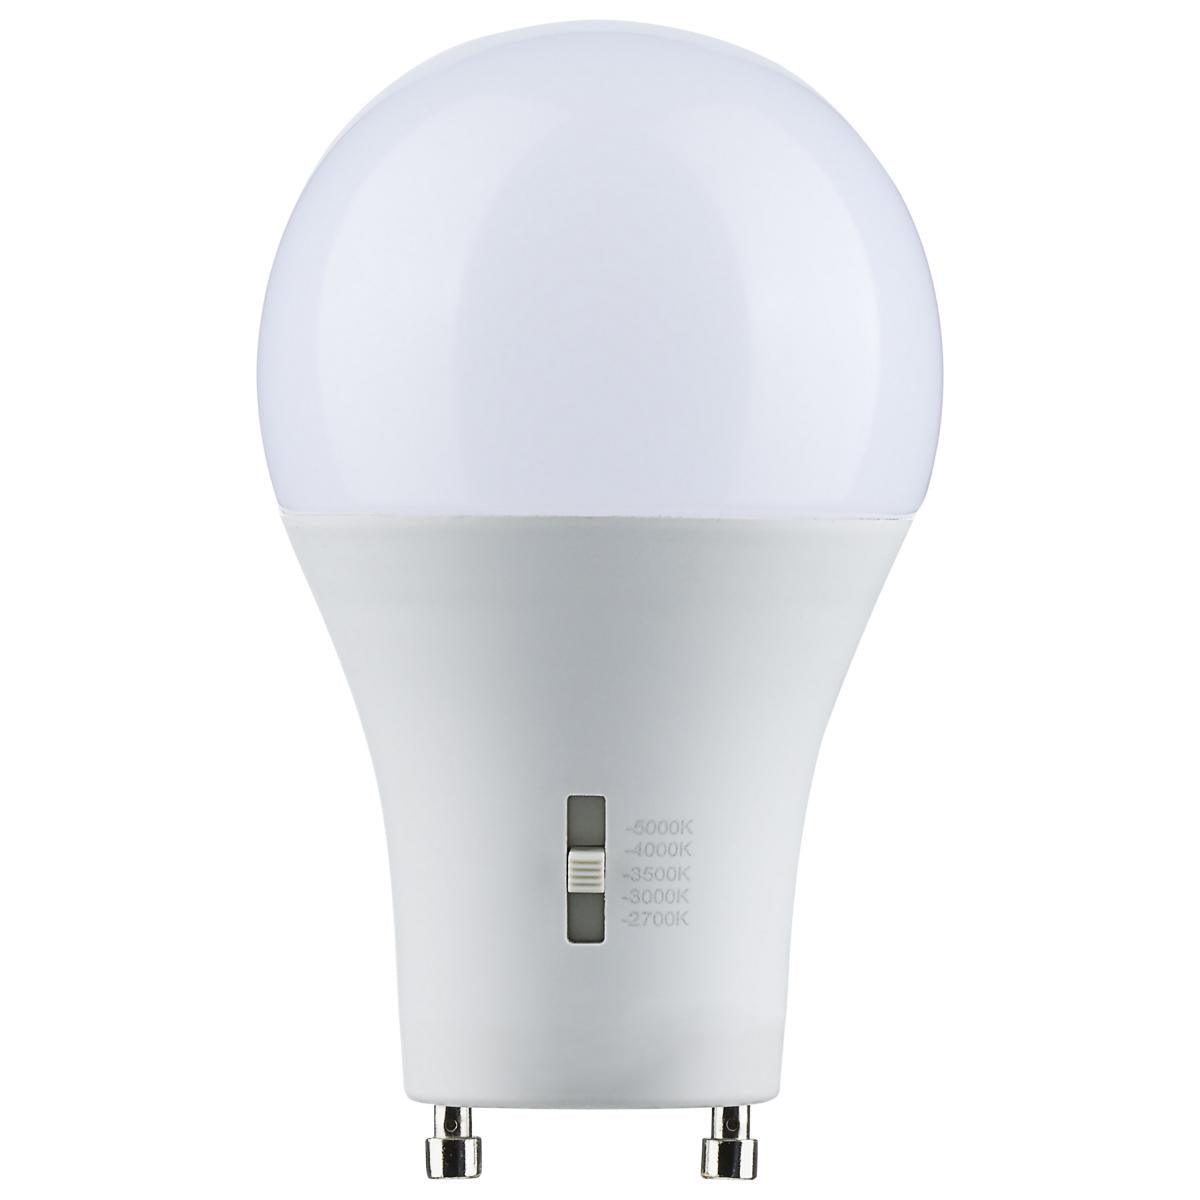 A19 LED Bulb, 75W Equivalent, 12 Watt, 1100 Lumens, Selectable CCT 2700K to 5000K, GU24 Base, Frosted Finish - Bees Lighting